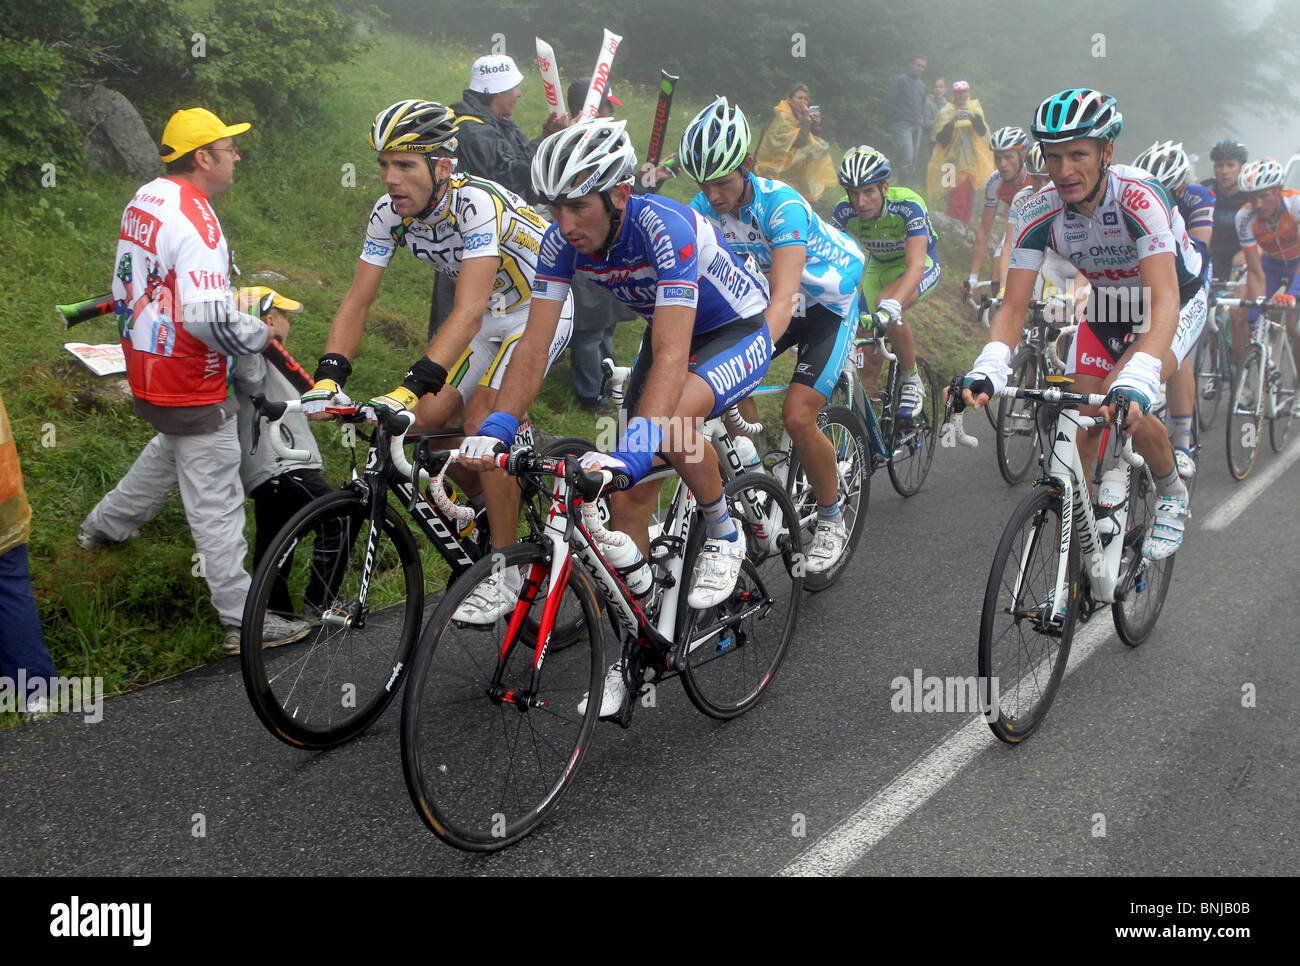 Cyclists competing in stage 17 of the 2010 Tour de France on the Col du Tourmalet in French Pyrenees, France Stock Photo